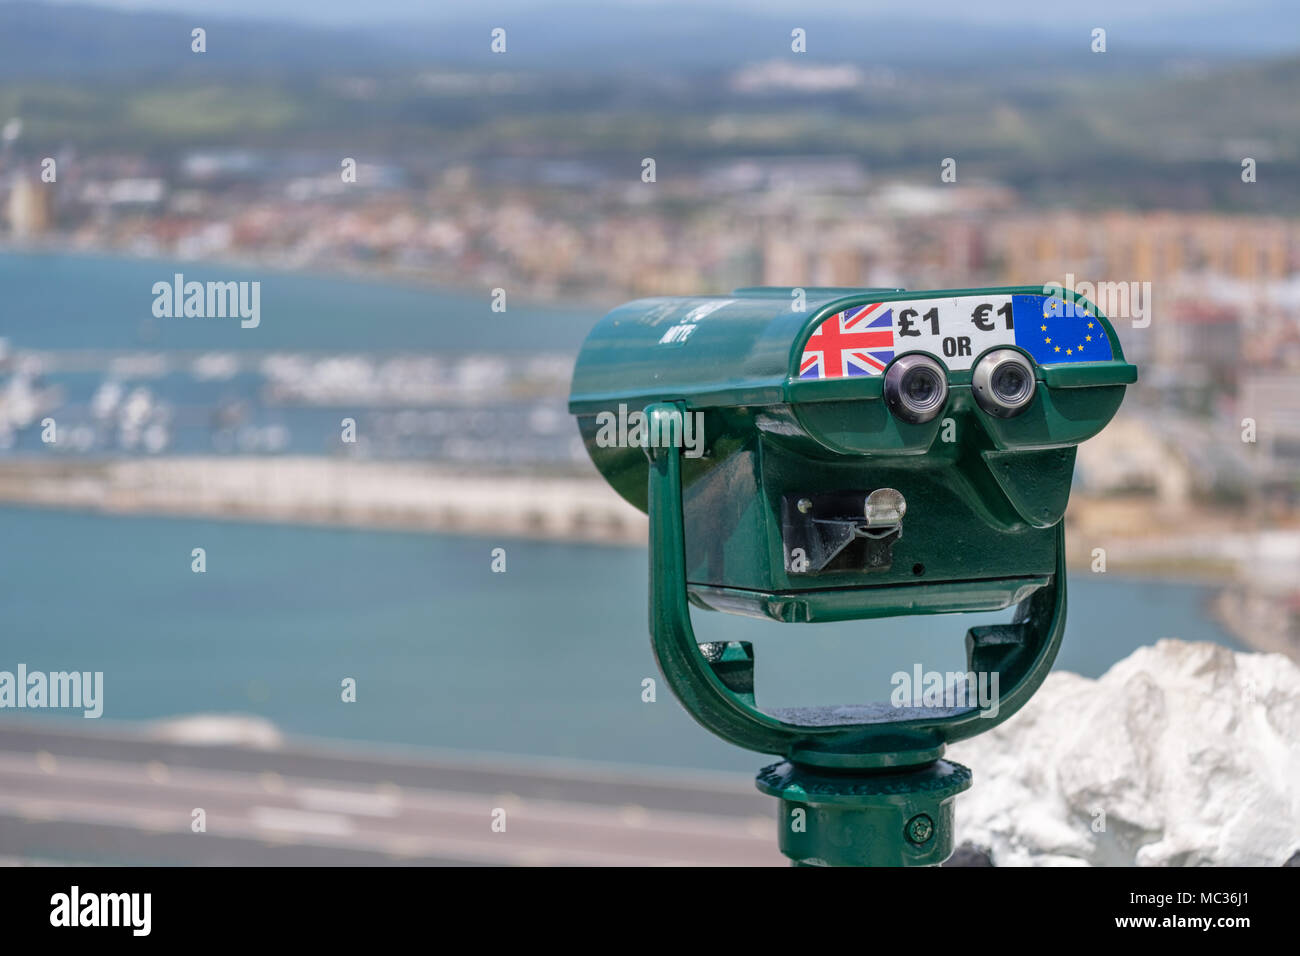 GIBRALTAR, SPAIN: 12-MAY 2017: Telescope at a viewing spot on the Rock of Gibraltar in May 2017. Stock Photo